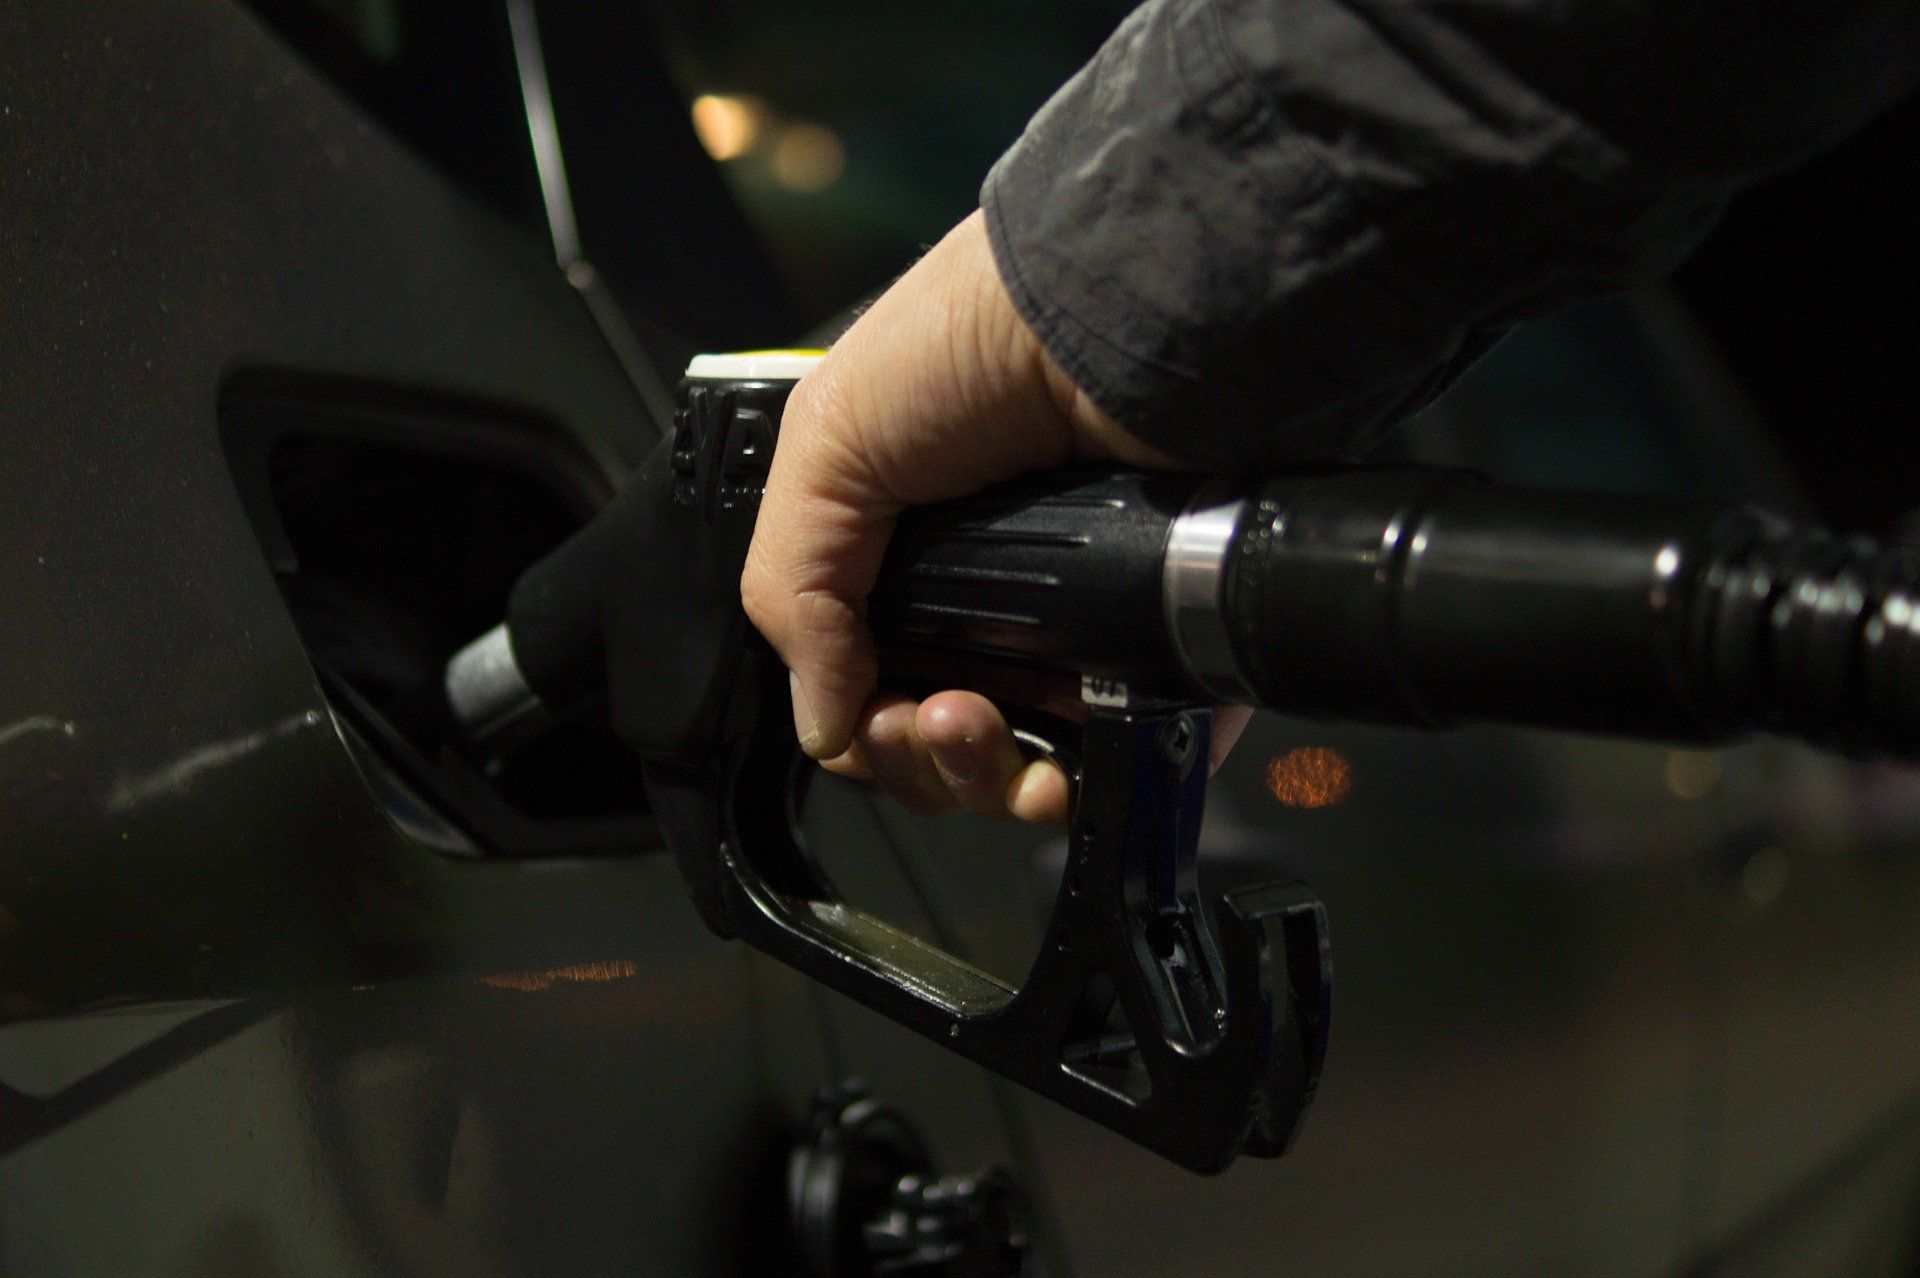 Fuel Price today: Petrol priced at Rs 95.41, diesel Rs 86.67 in Delhi on December 31